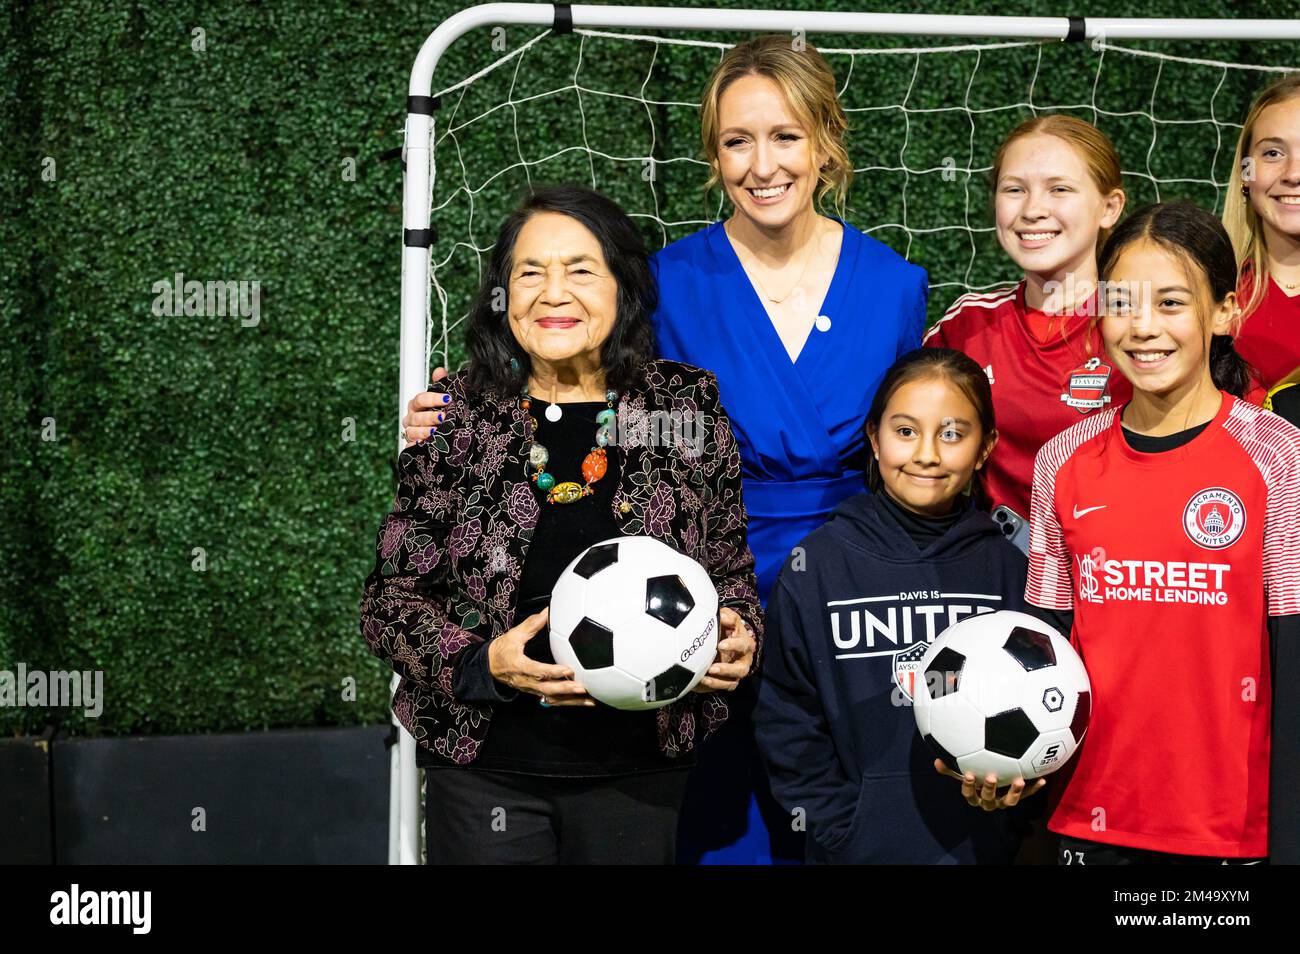 Farmworker civil rights leader and previous inductee Dolores Huerta poses with young soccer players at California Museum's Hall of Fame event. Stock Photo